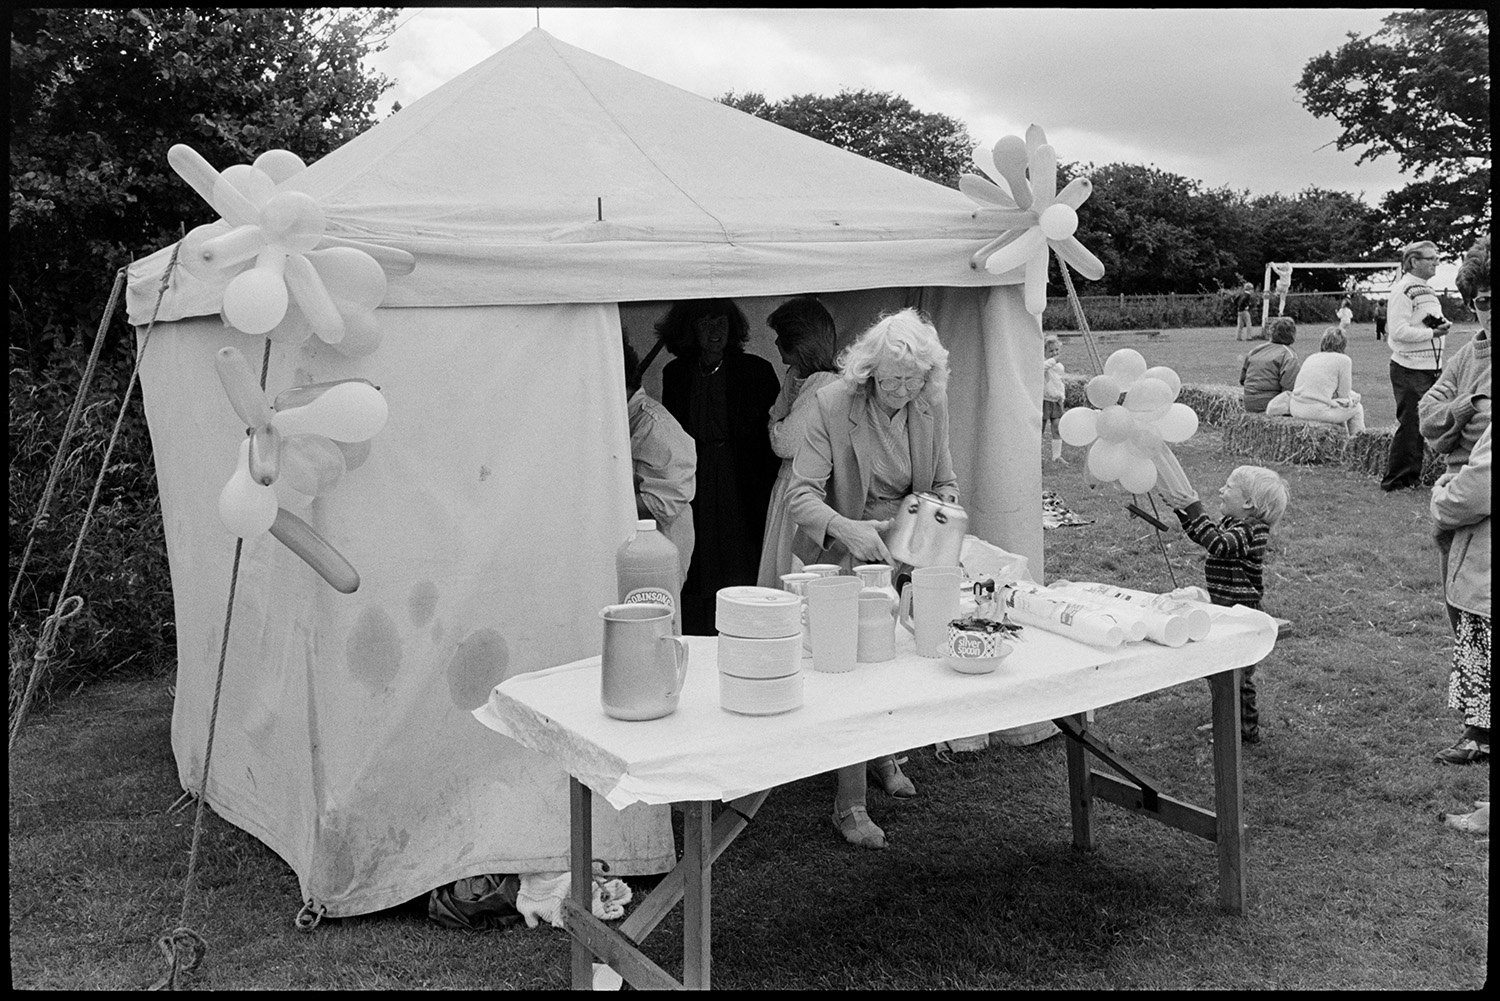 School sports day, refreshment tent, children and spectators. 
[A woman setting up refreshments on a table outside a small tent with balloons at Dolton School sports day. Cups, a teapot, jugs and bottle of Robinsons squash are on the table. A young child is looking at the balloons on the tent and people are watching sports in the background.]